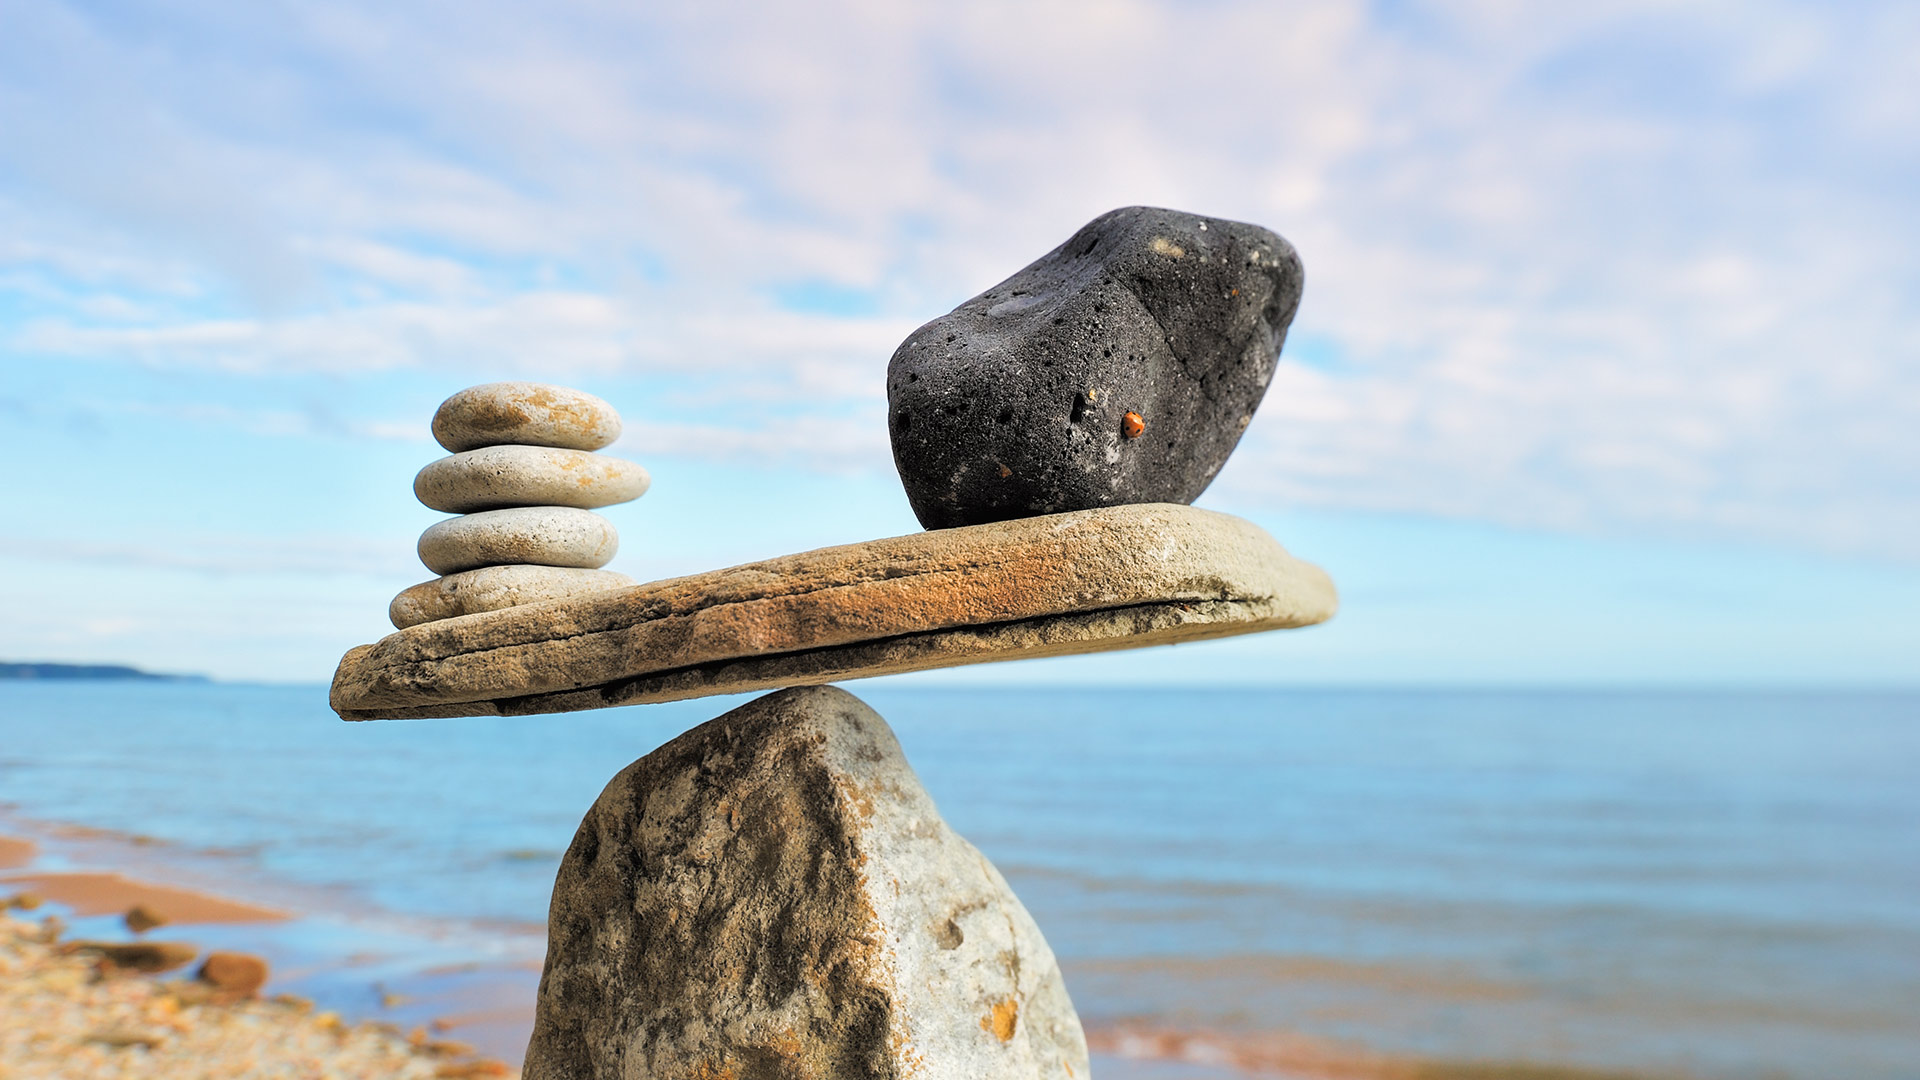 Wellbalanced stones on top of boulder at beach